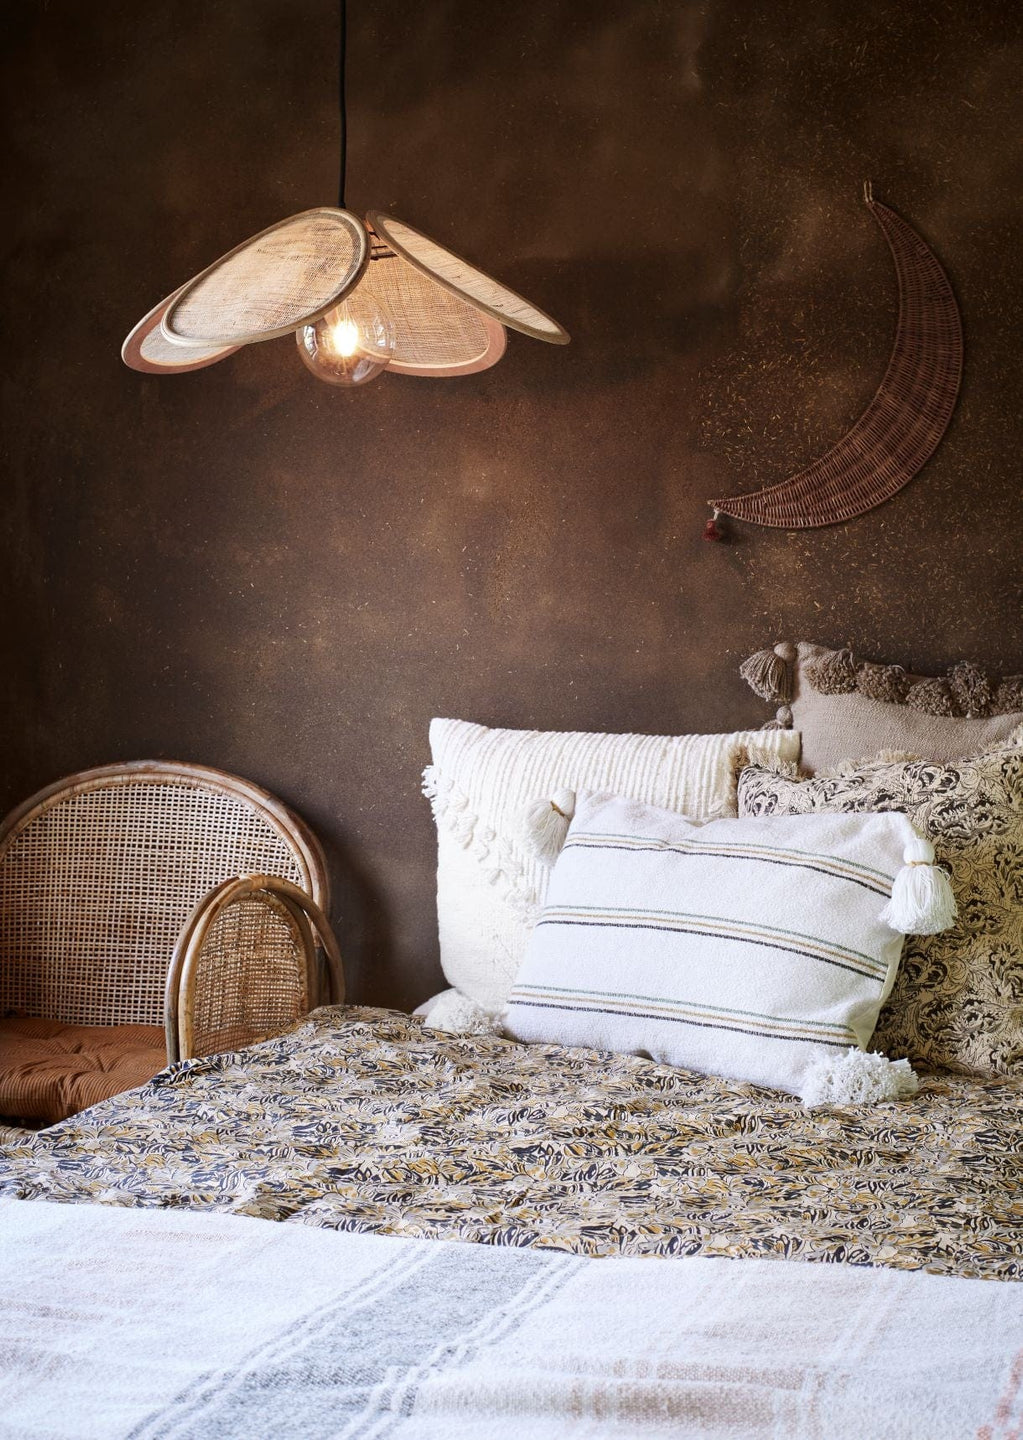 Bedroom decoration: the new trends worth learning!